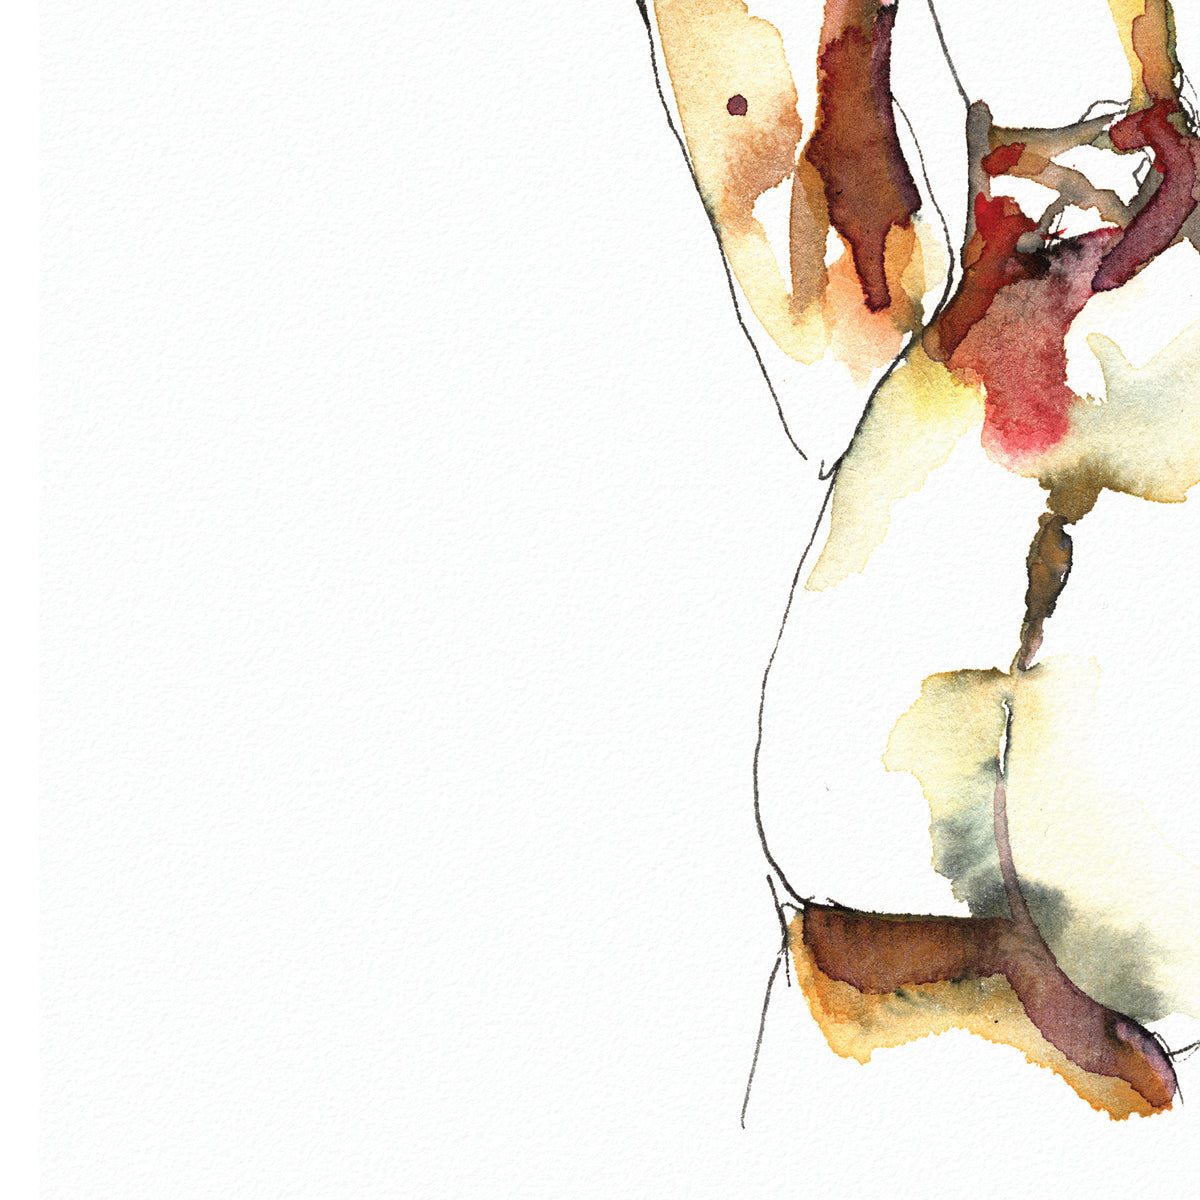 Firm Butt With Handsome Man Reaching Behind - Ink and Watercolor - Giclee Art Print